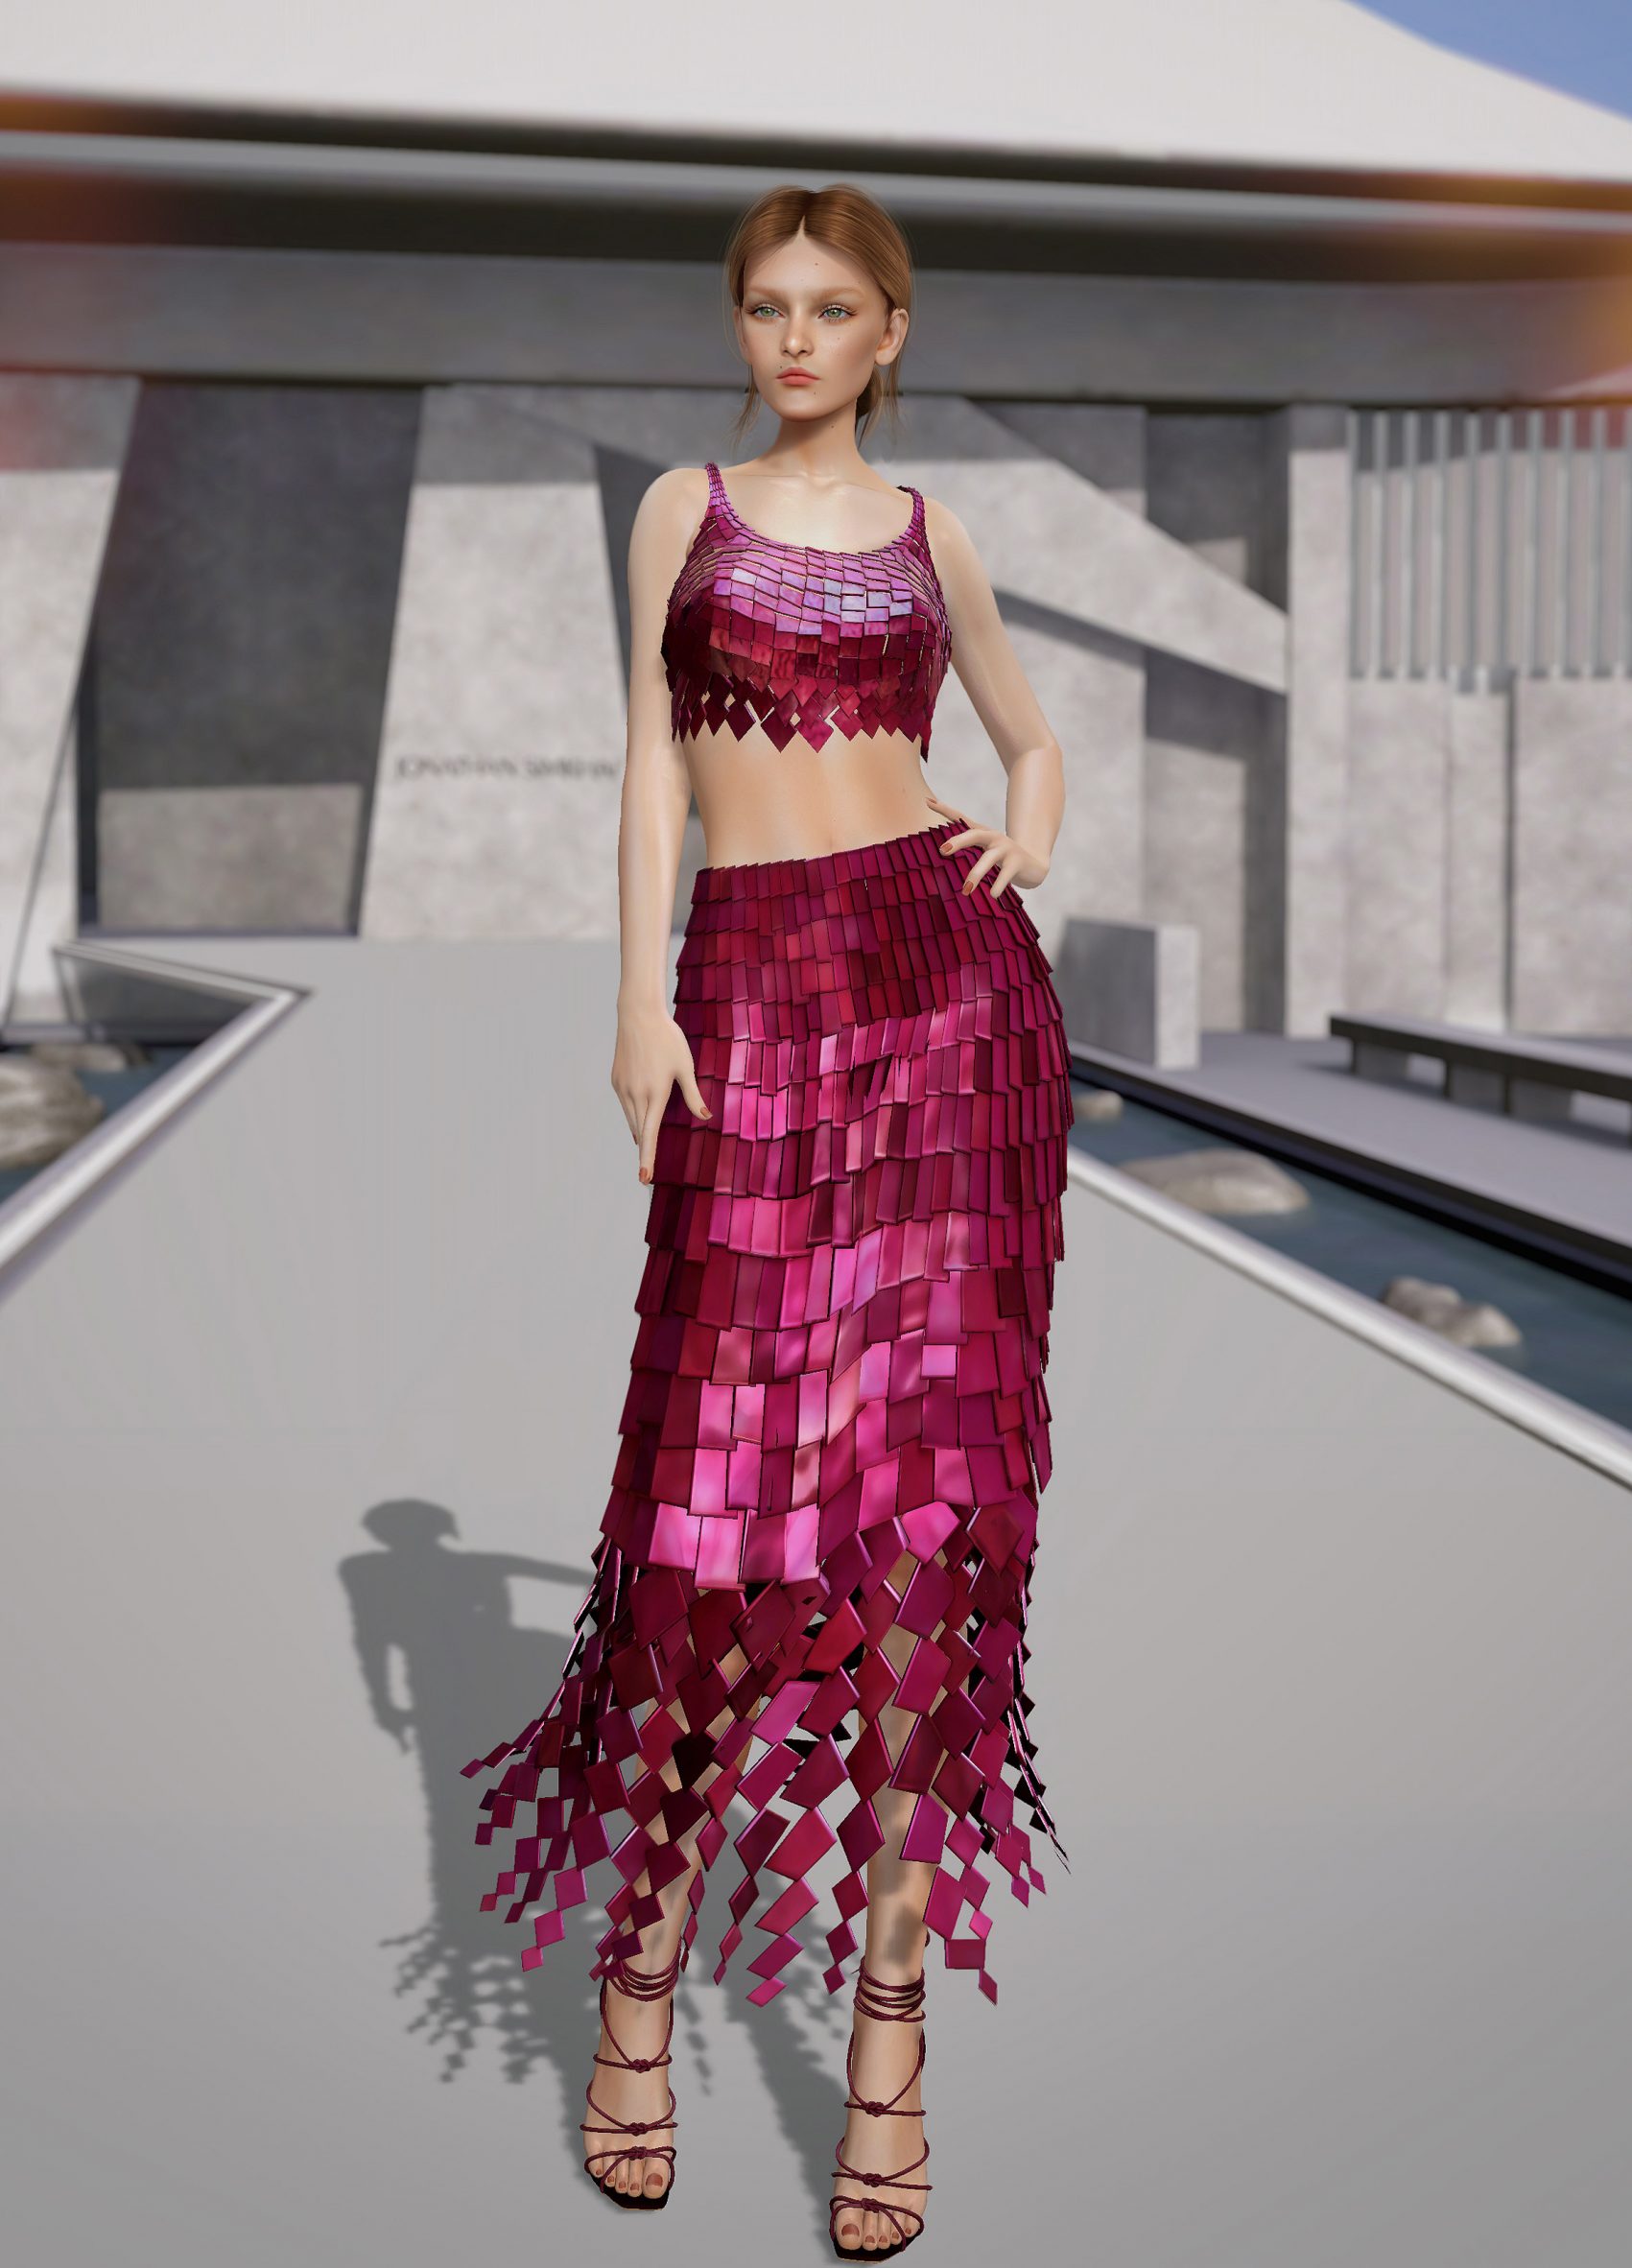 House of Blueberry launches Boy Meets Girl digital wearables on Roblox